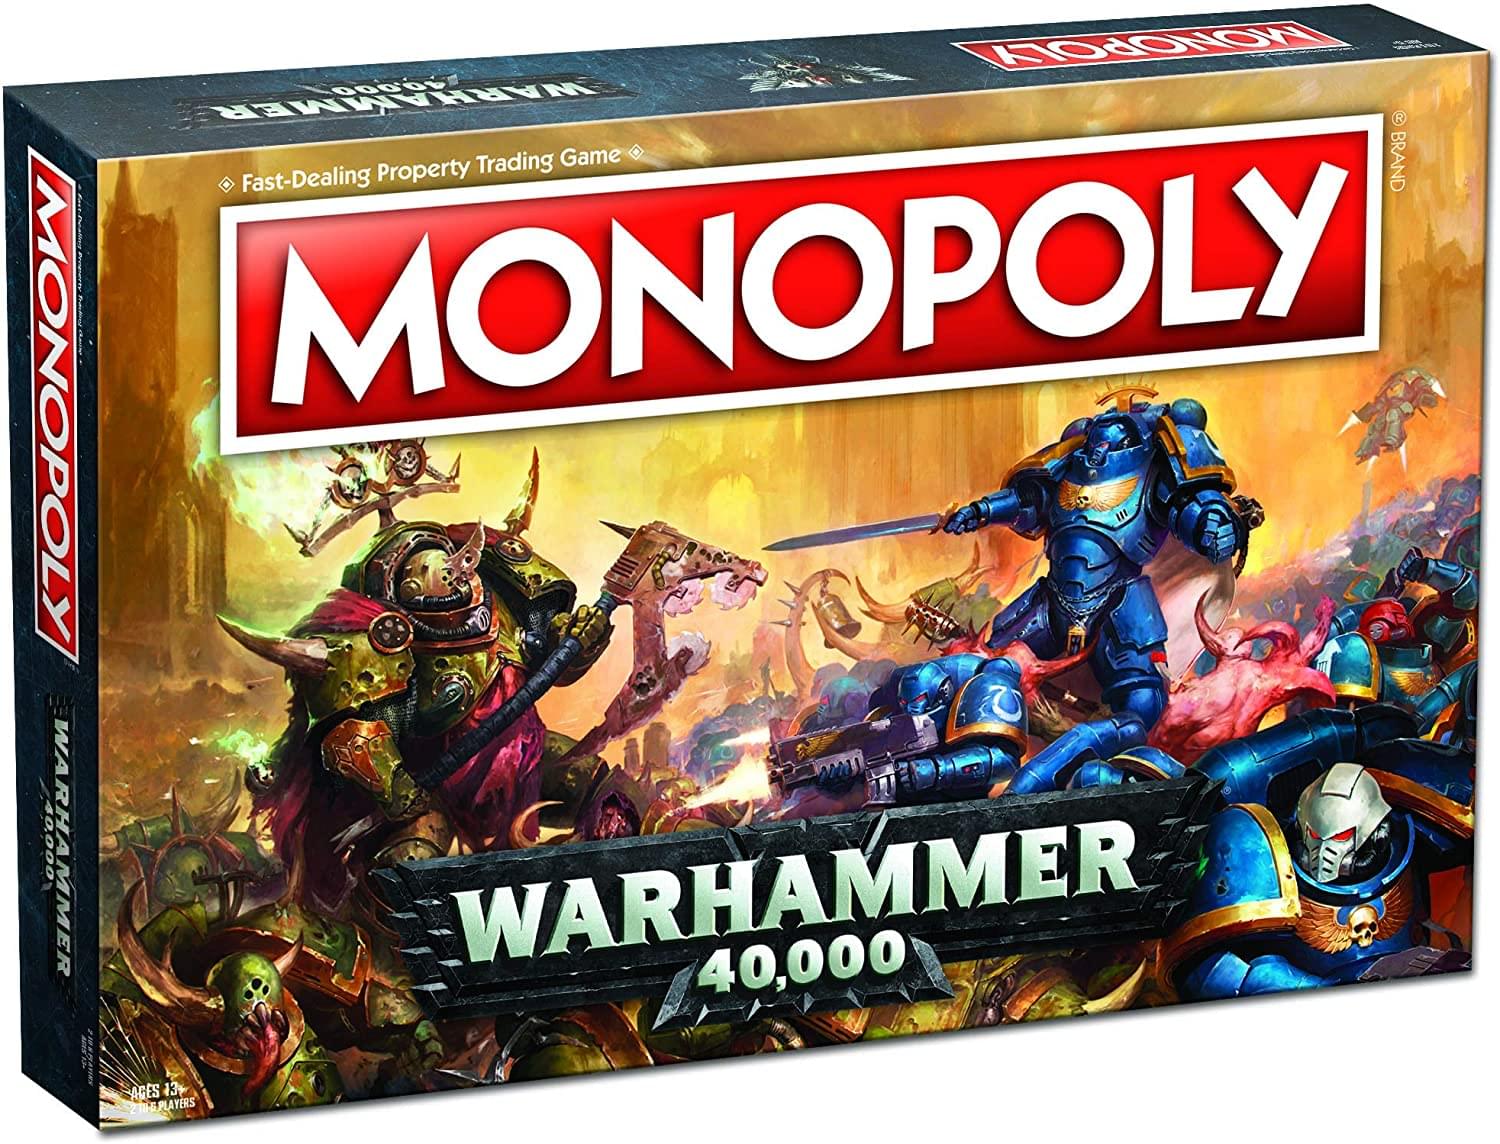 Warhammer 40k Monopoly Board Game | For 2-6 Players